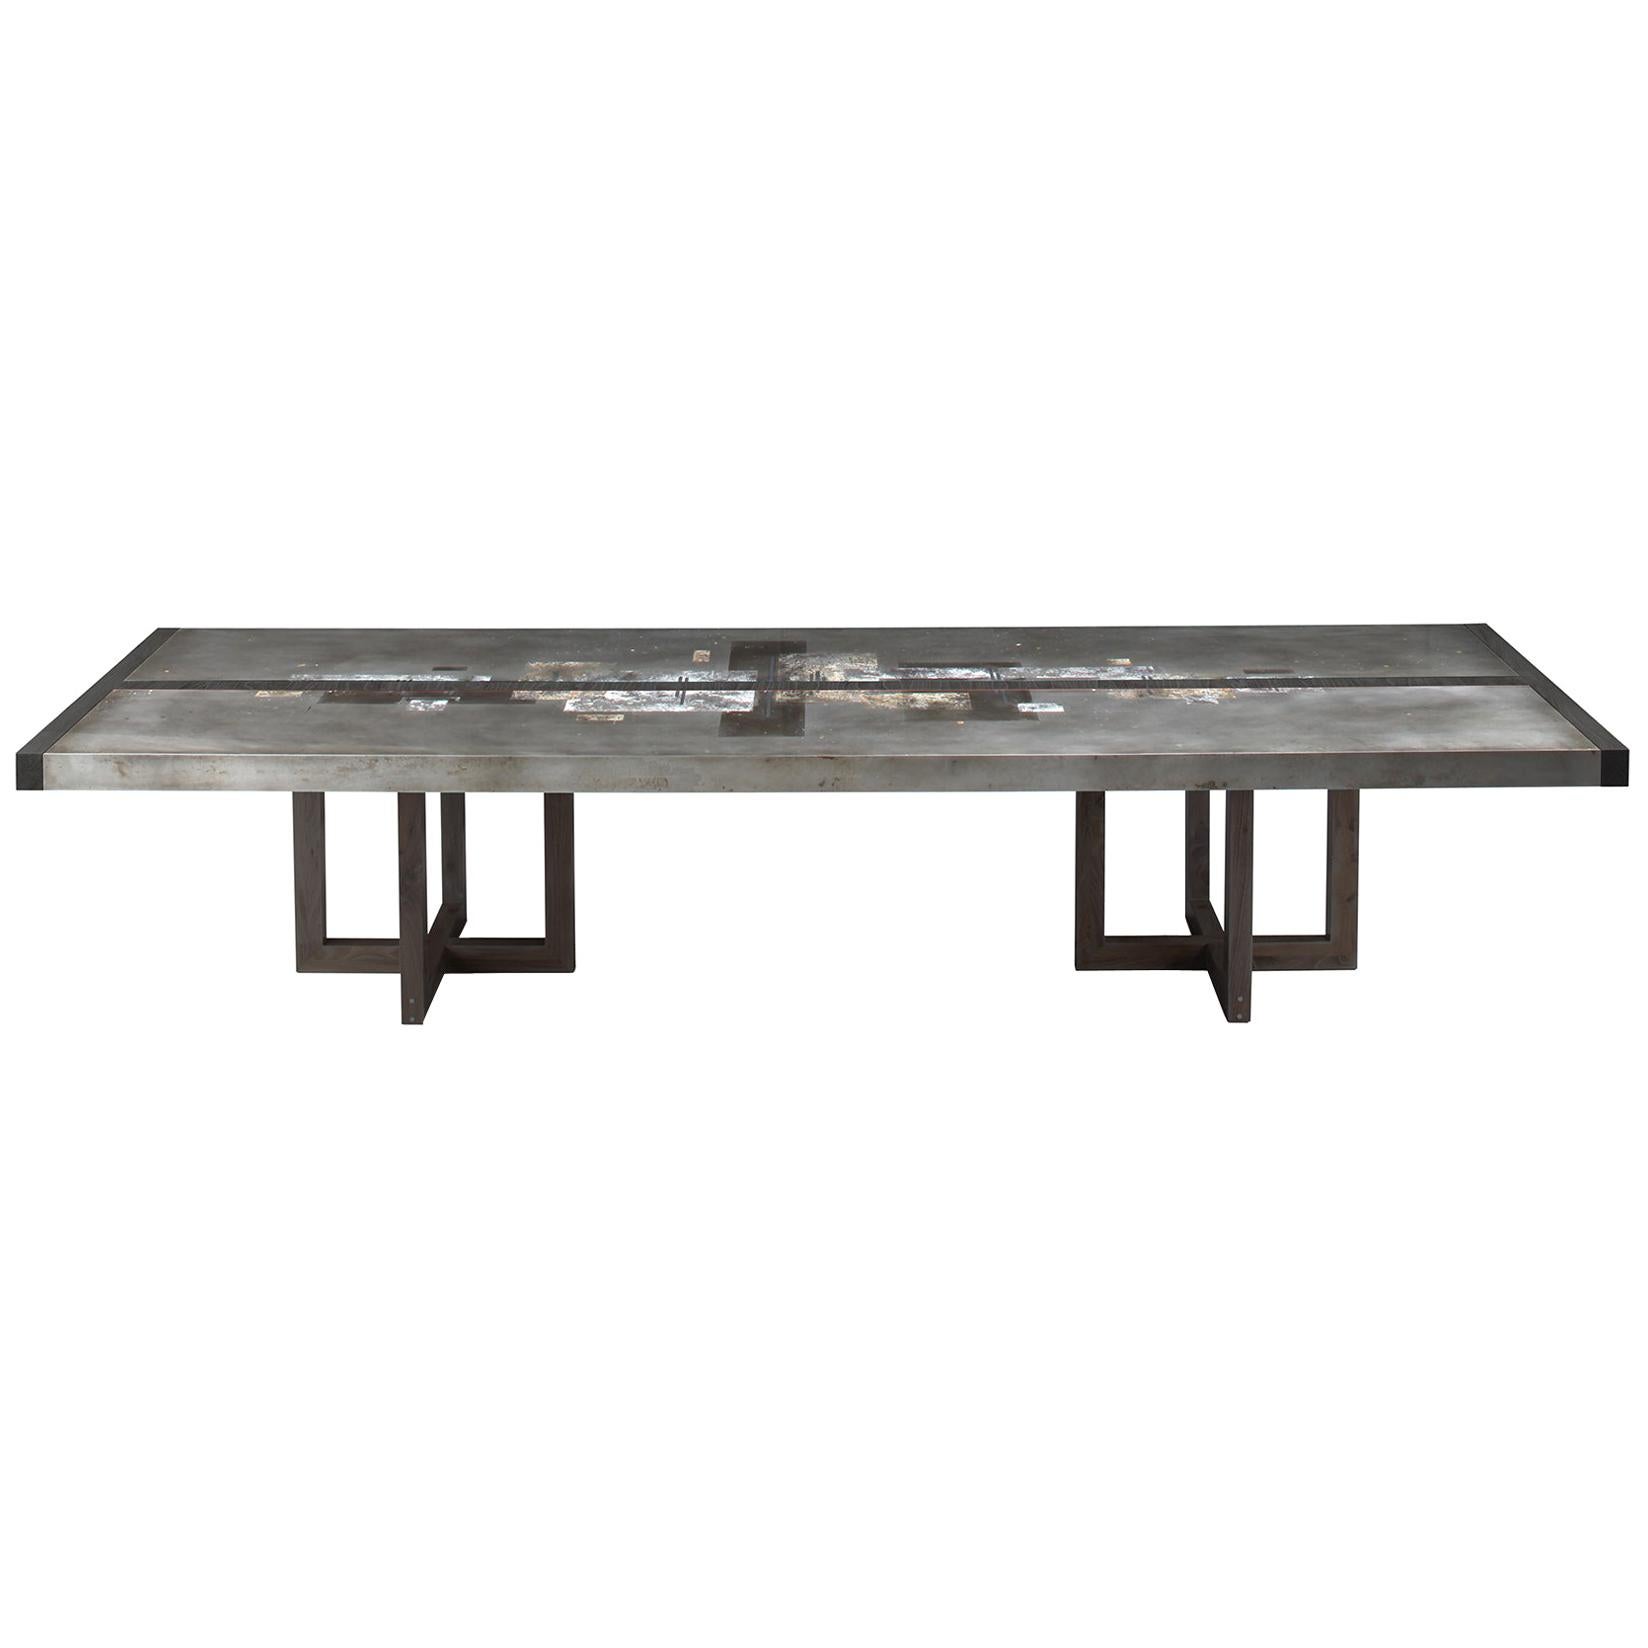 "Divided Lands" Etched Zinc Dining Table by Artist/Designer Florian Roeper